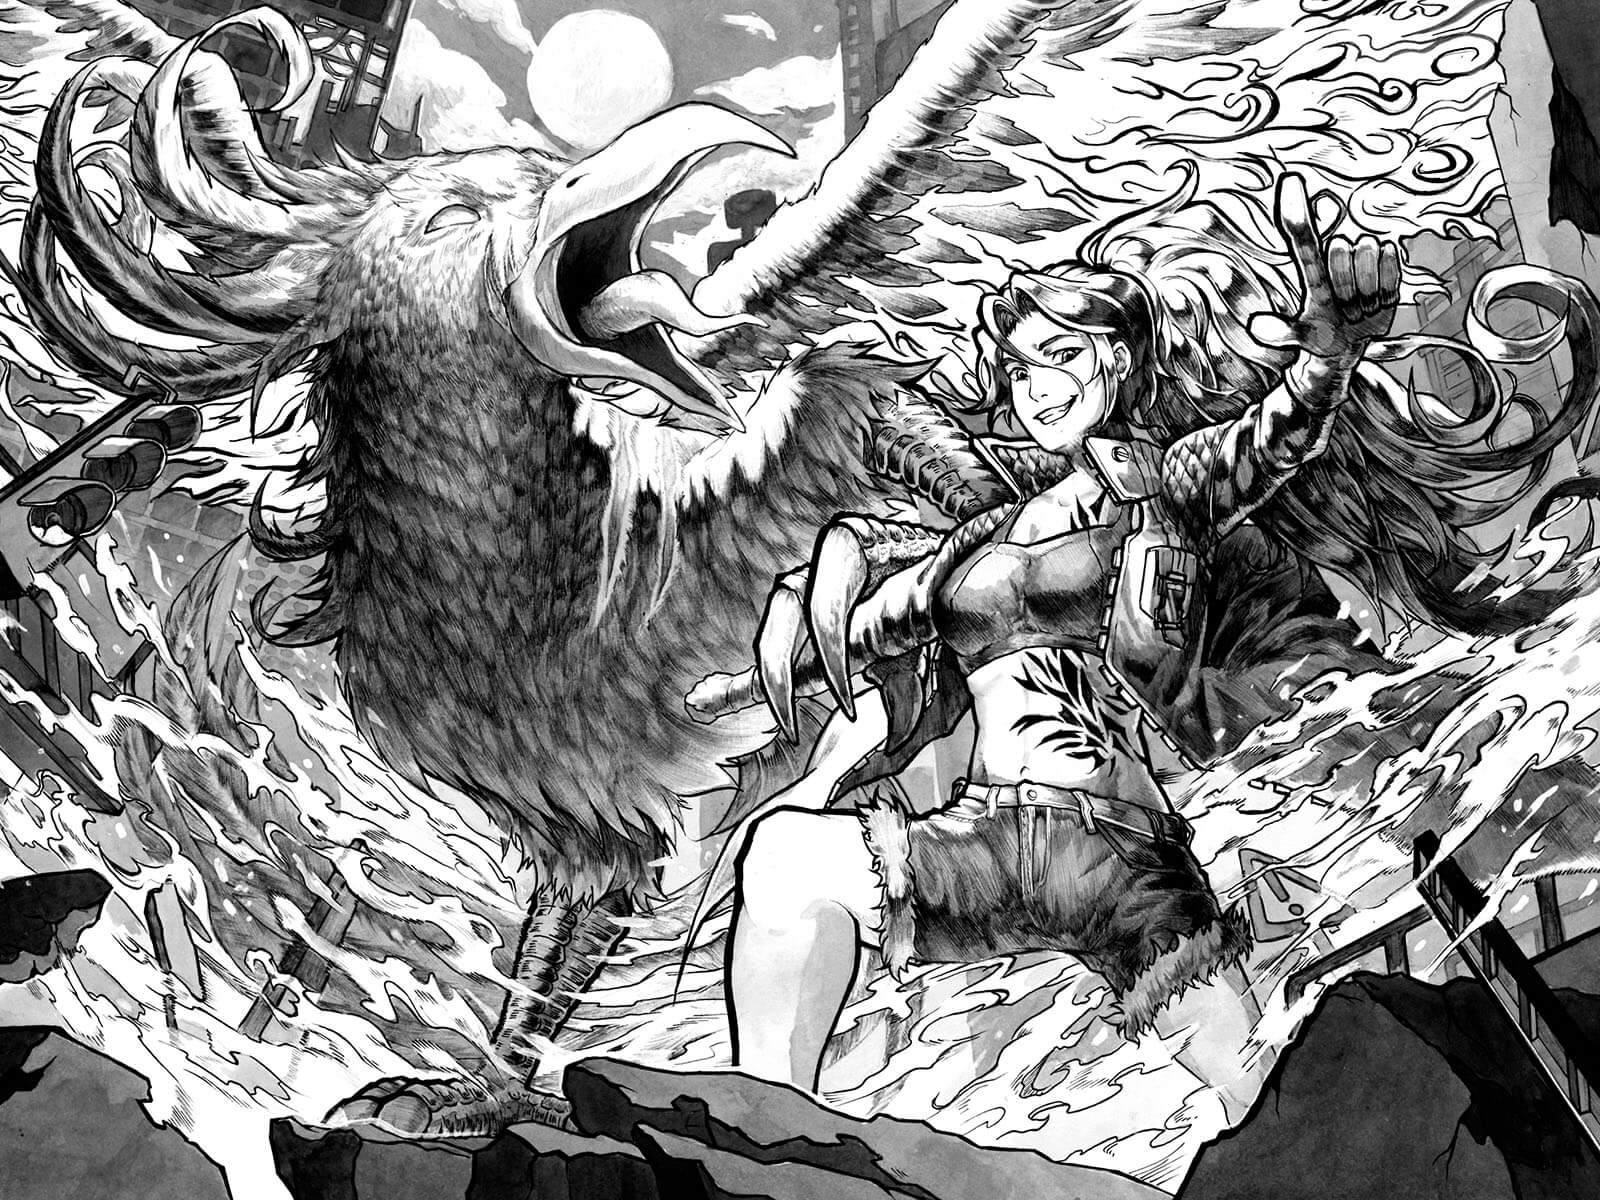 Black-and-White sketch of a woman posing with a griffon-like animal.